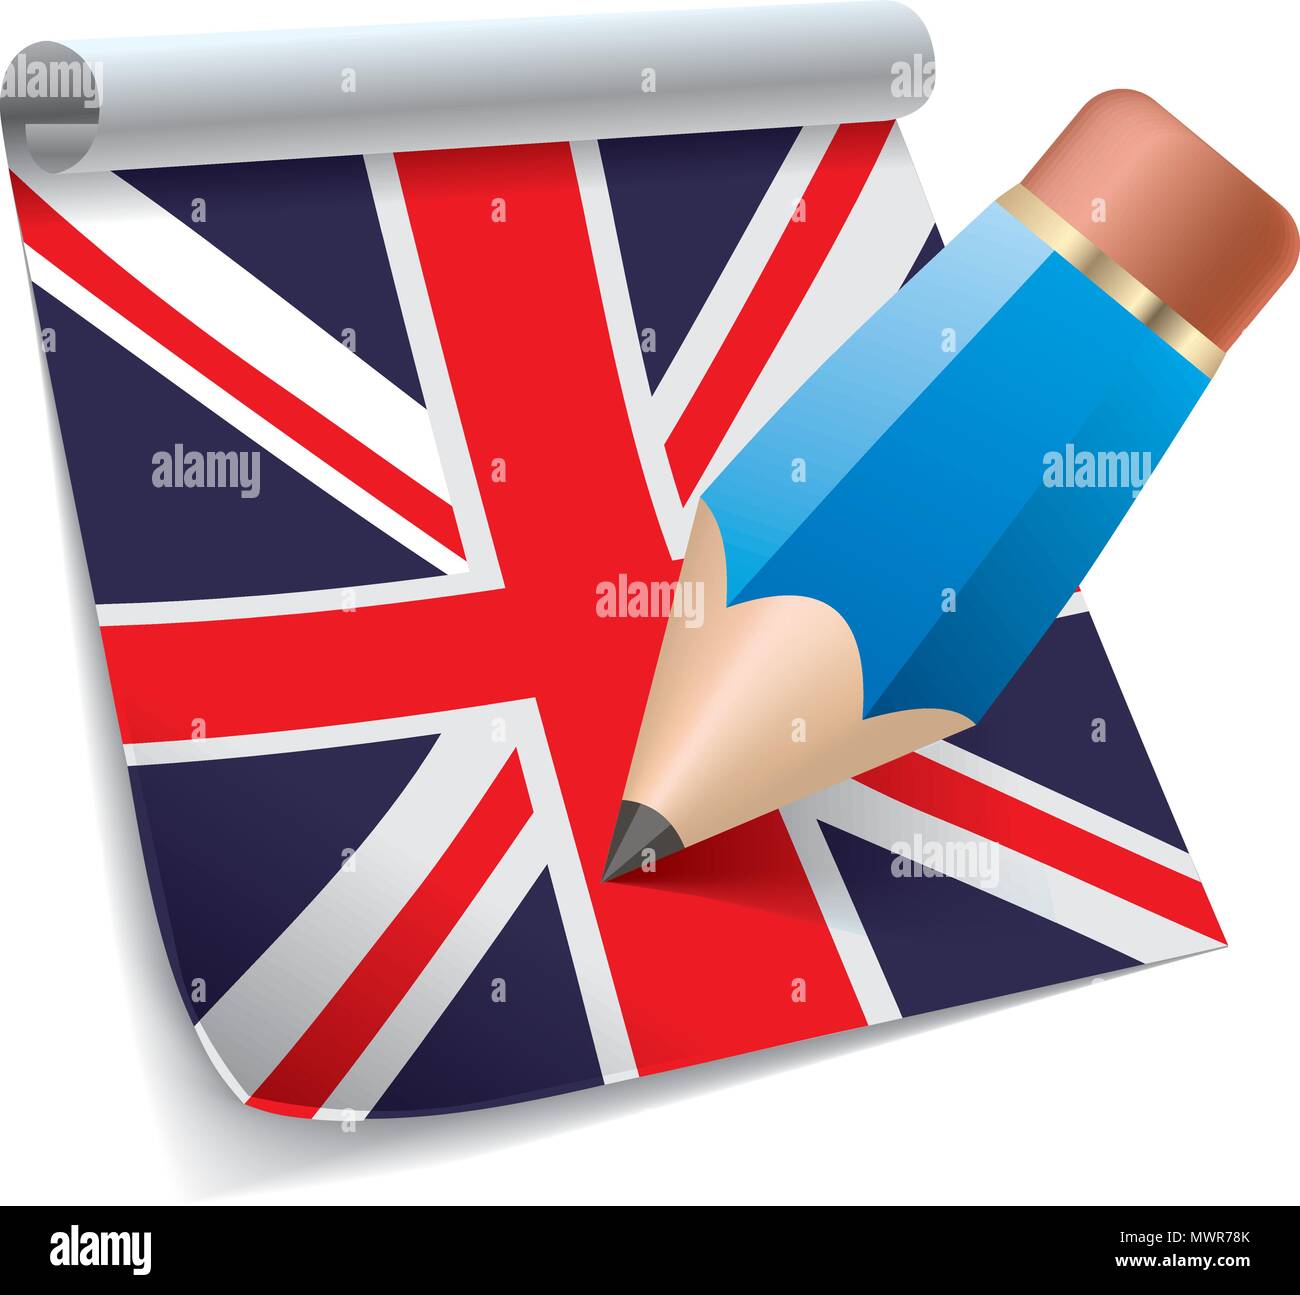 Flag of uk pencil drawing vector image Stock Vector Images - Alamy